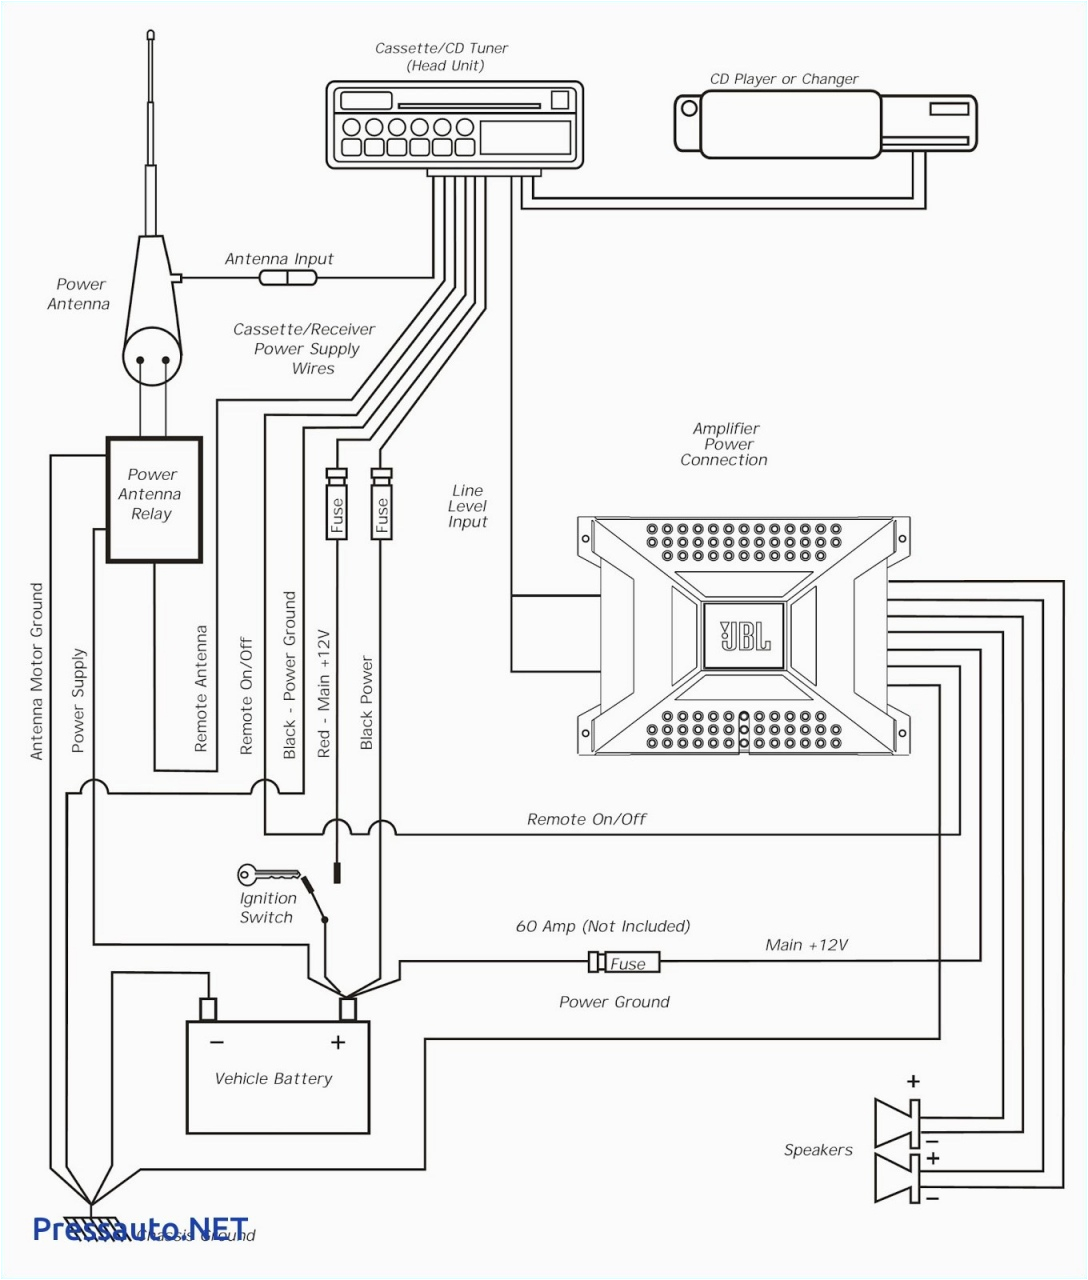 sony car stereo wiring diagram for car audio valid wiring diagram sony car decks audio wiring schematics